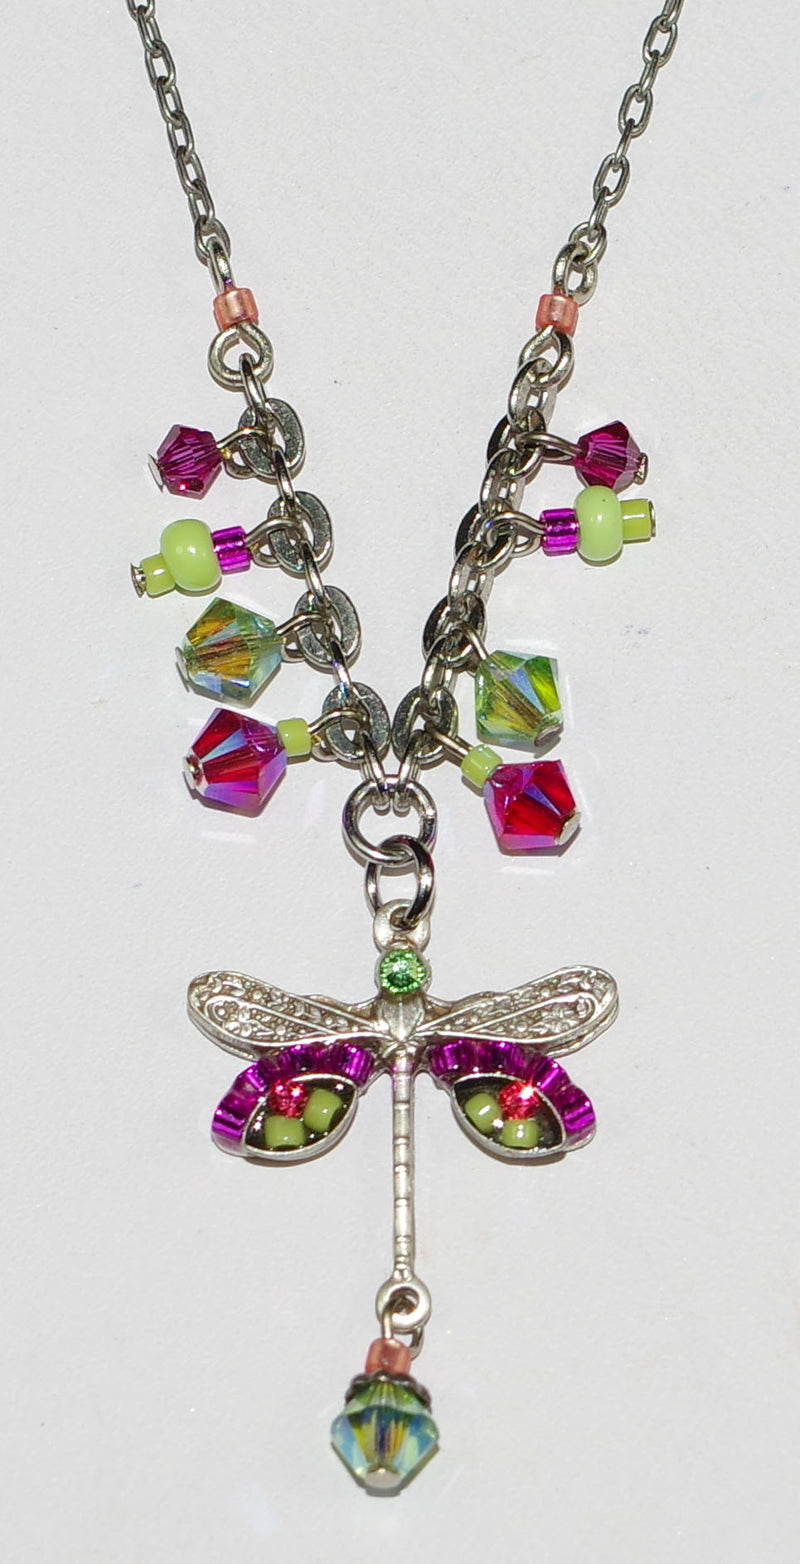 FIREFLY NECKLACE SMALL DRAGONFLY HP:  pink, green stones in 1" pendant,  silver 18" adjustable chain